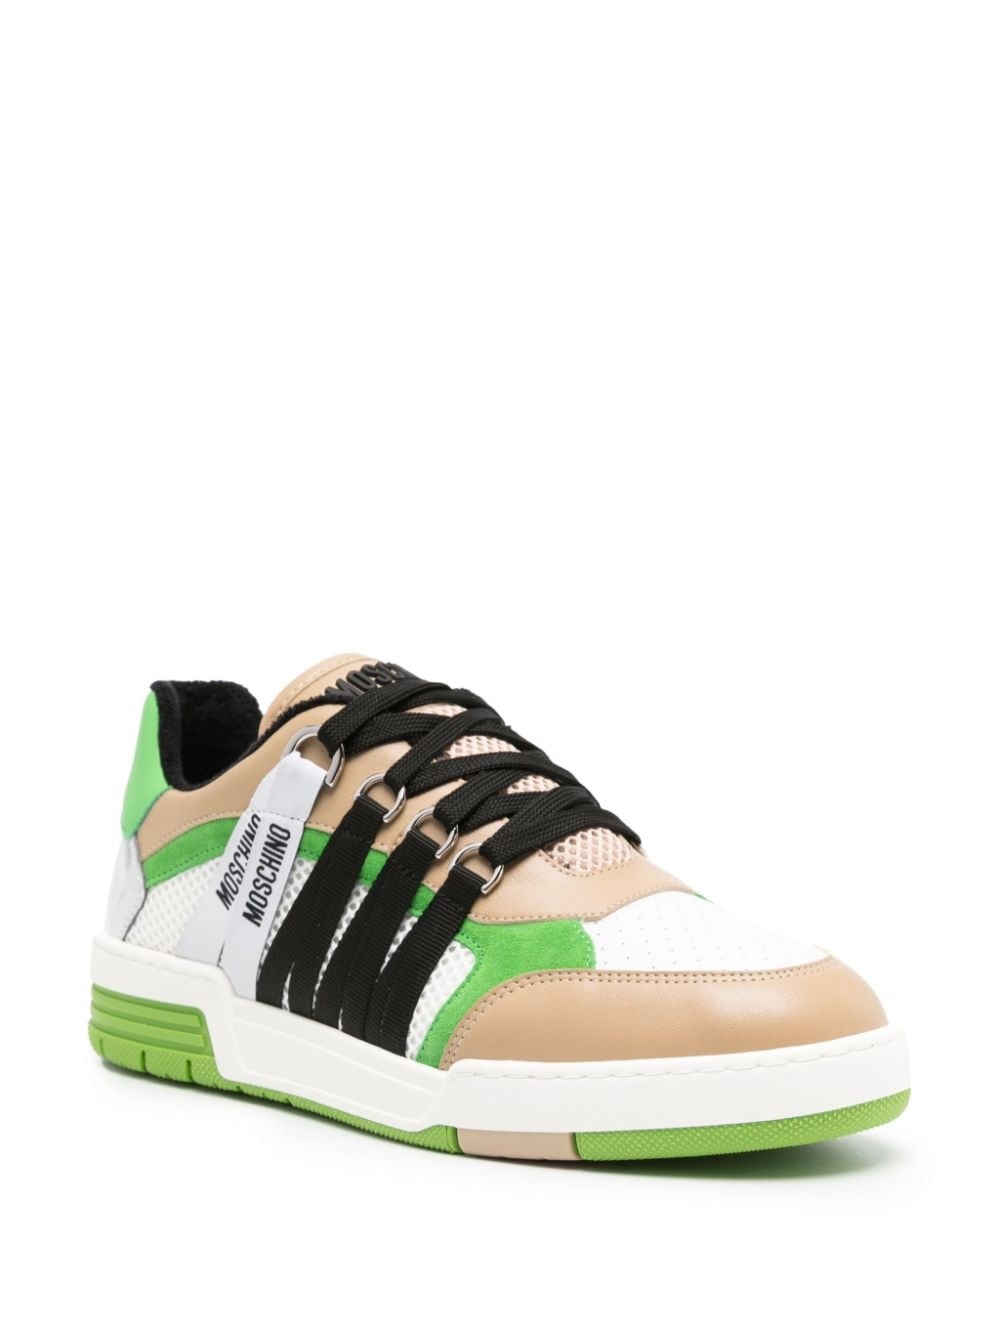 Kevin panelled sneakers - 2